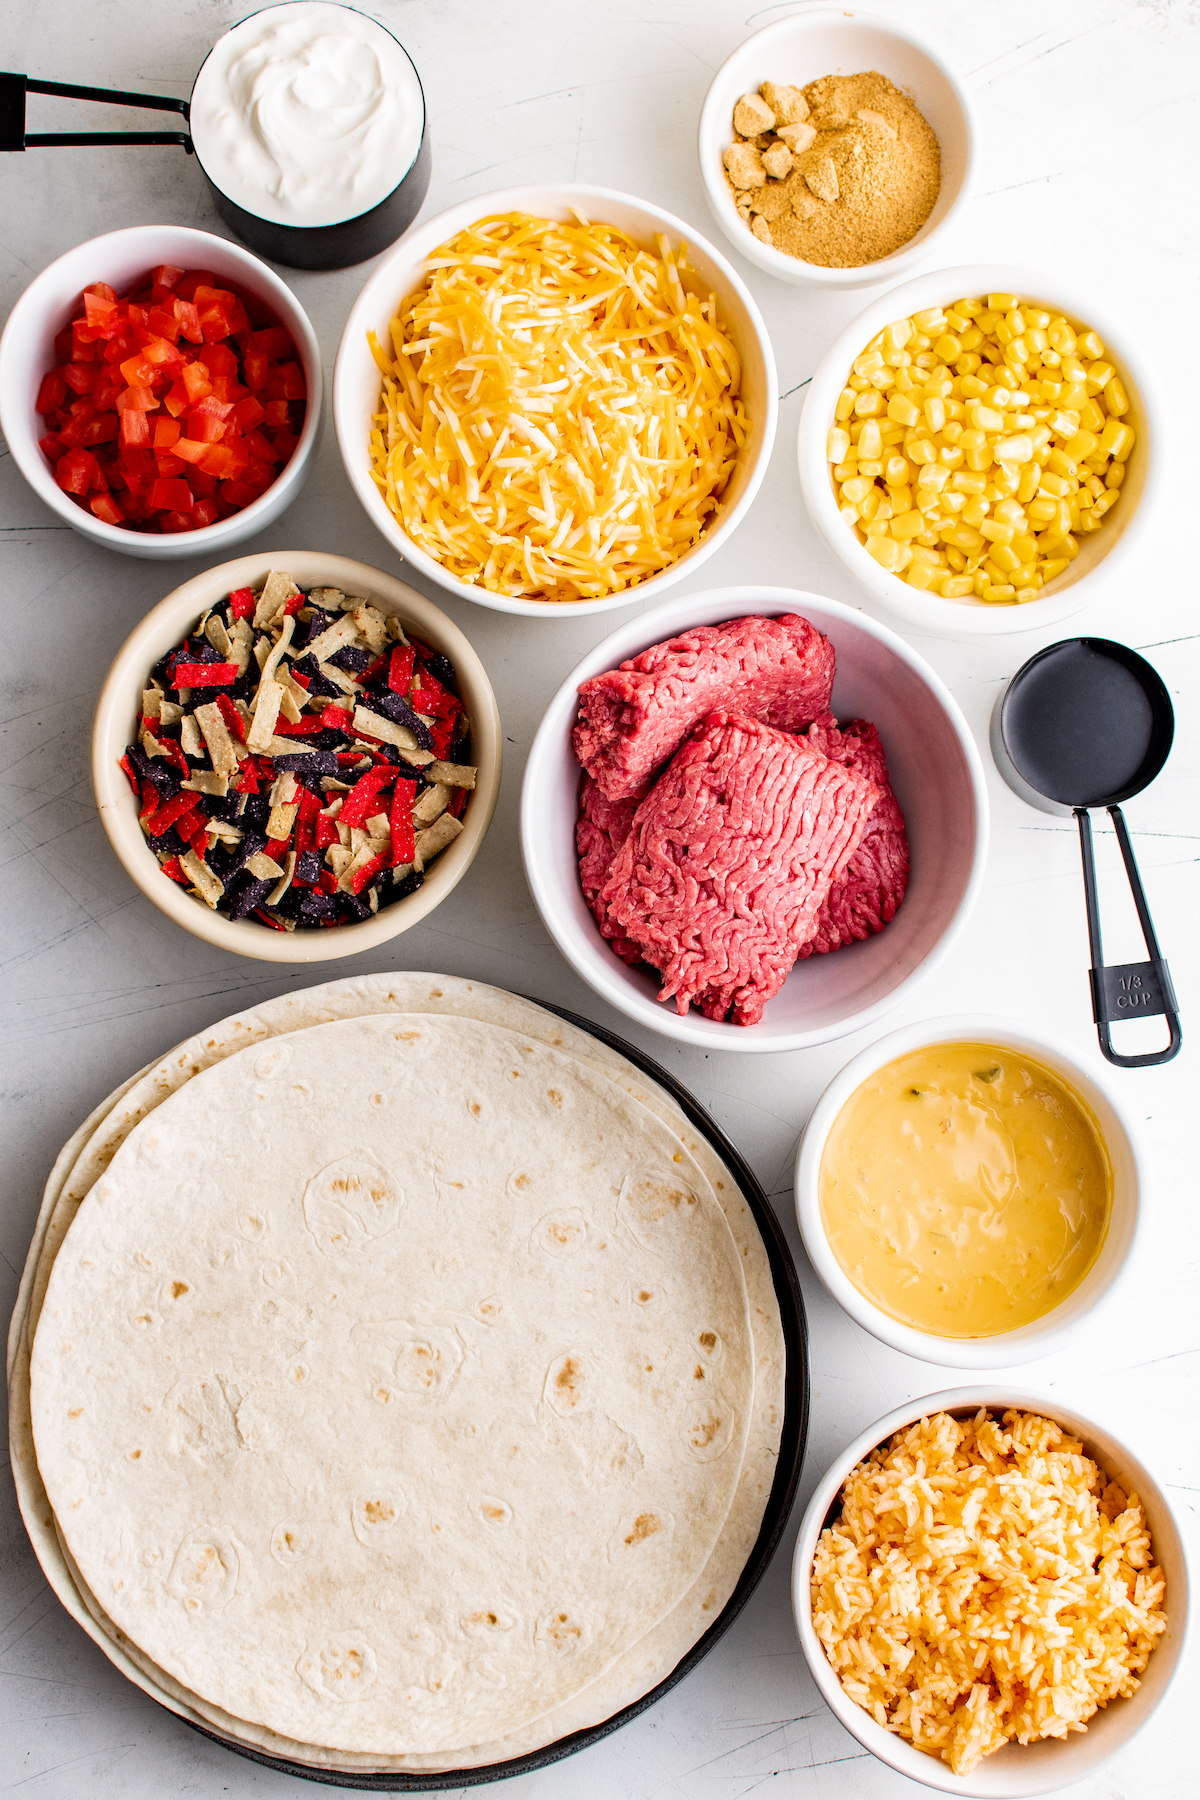 Burrito ingredients measured and arranged on a work surface.